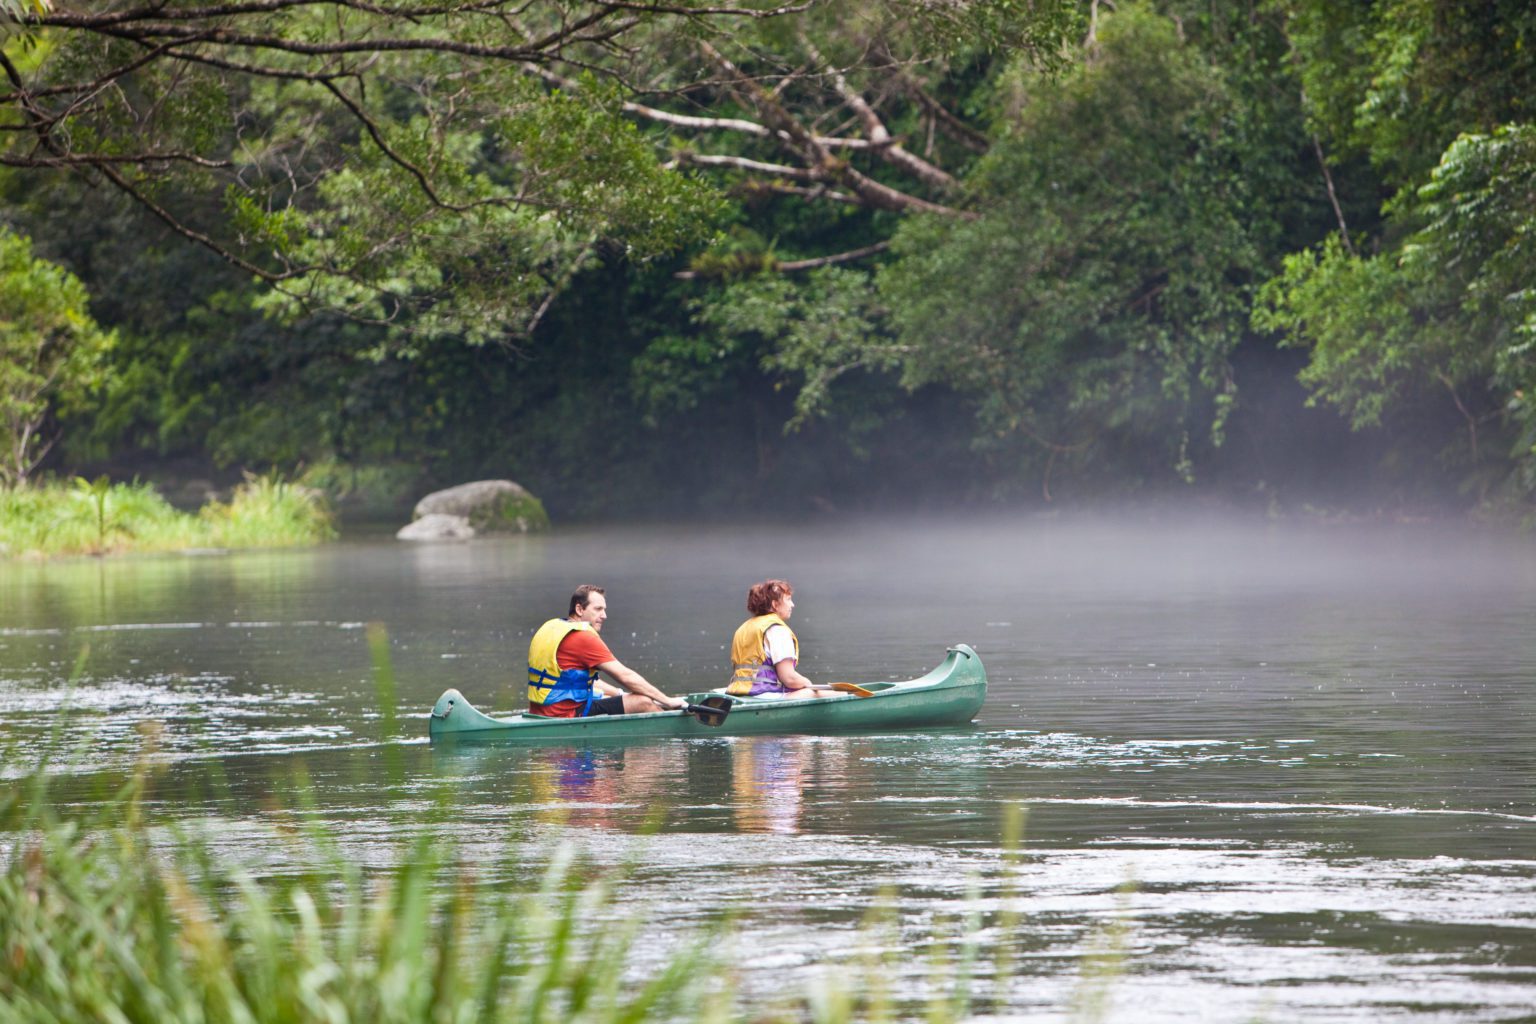 canoeing on safari through the misty Daintree Forest from Silky Oaks